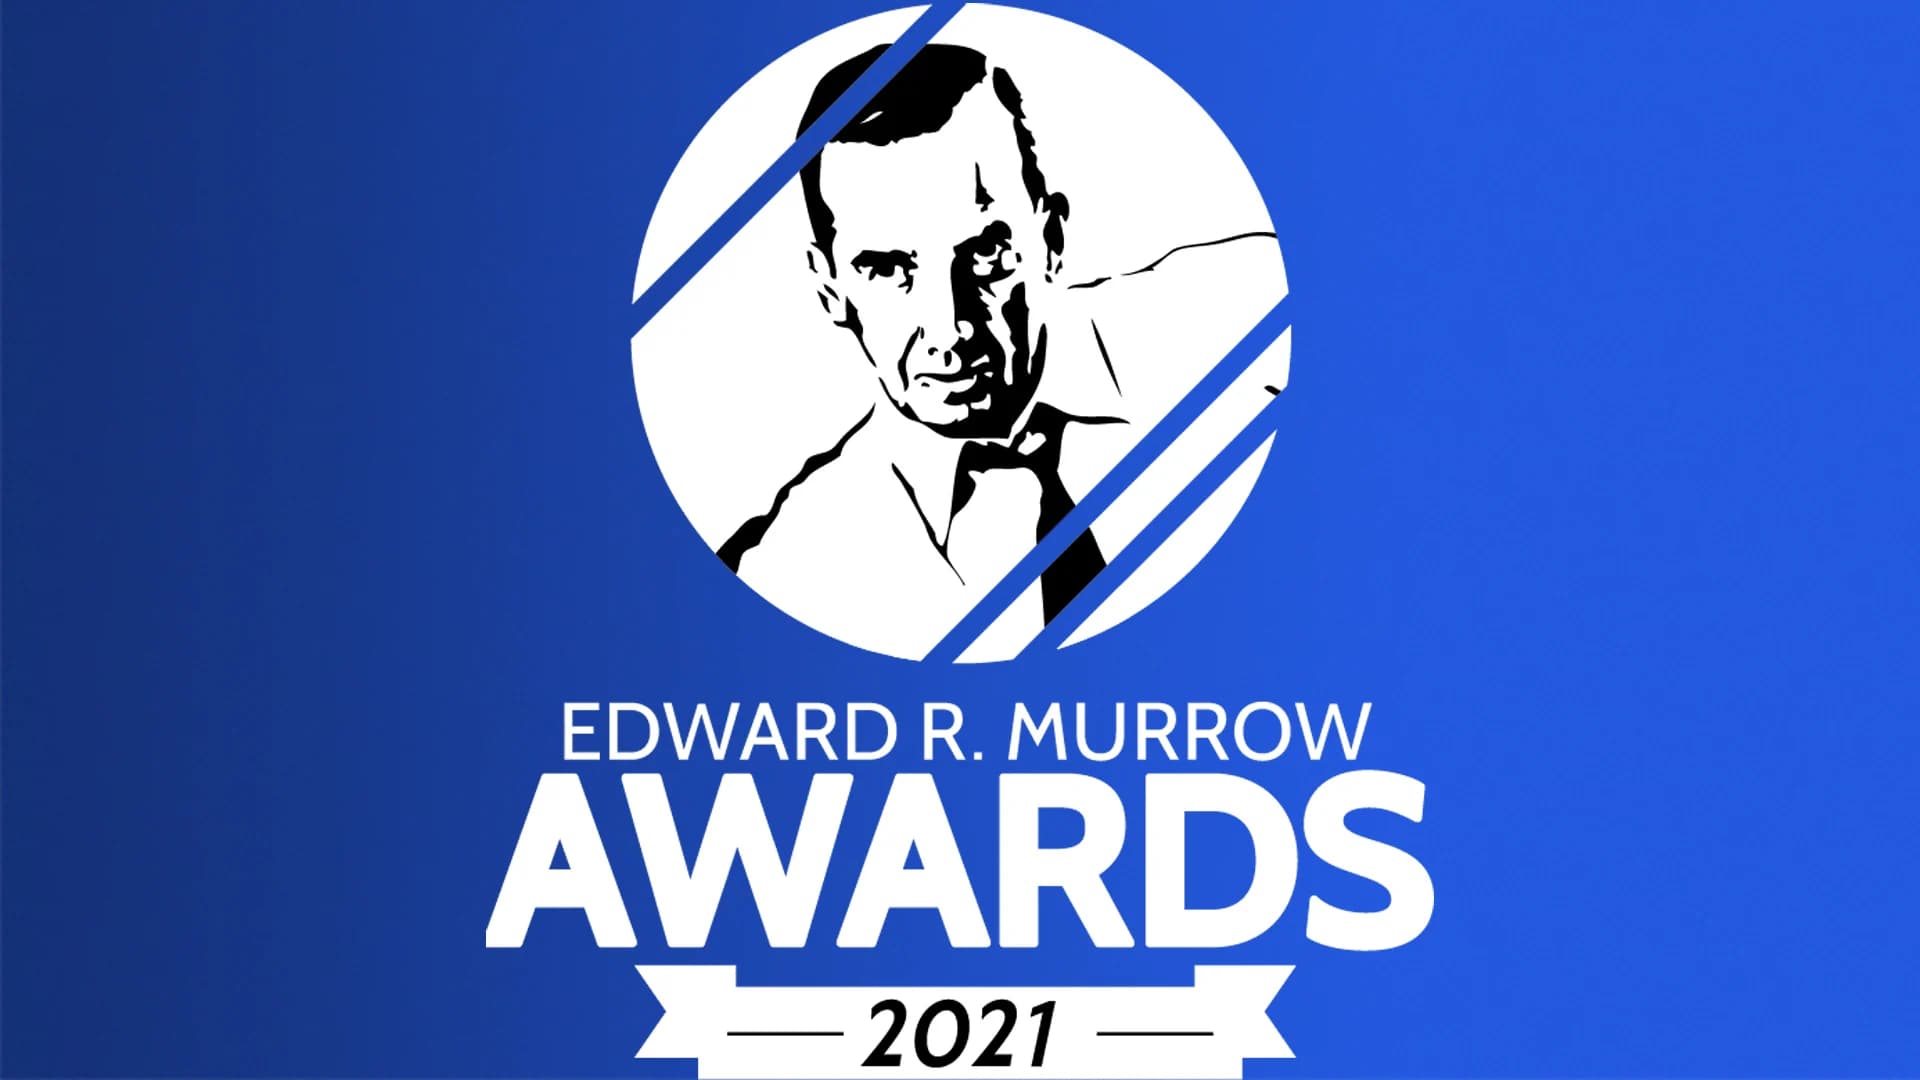 News 12 Networks honored with 3 Regional Edward R. Murrow Awards